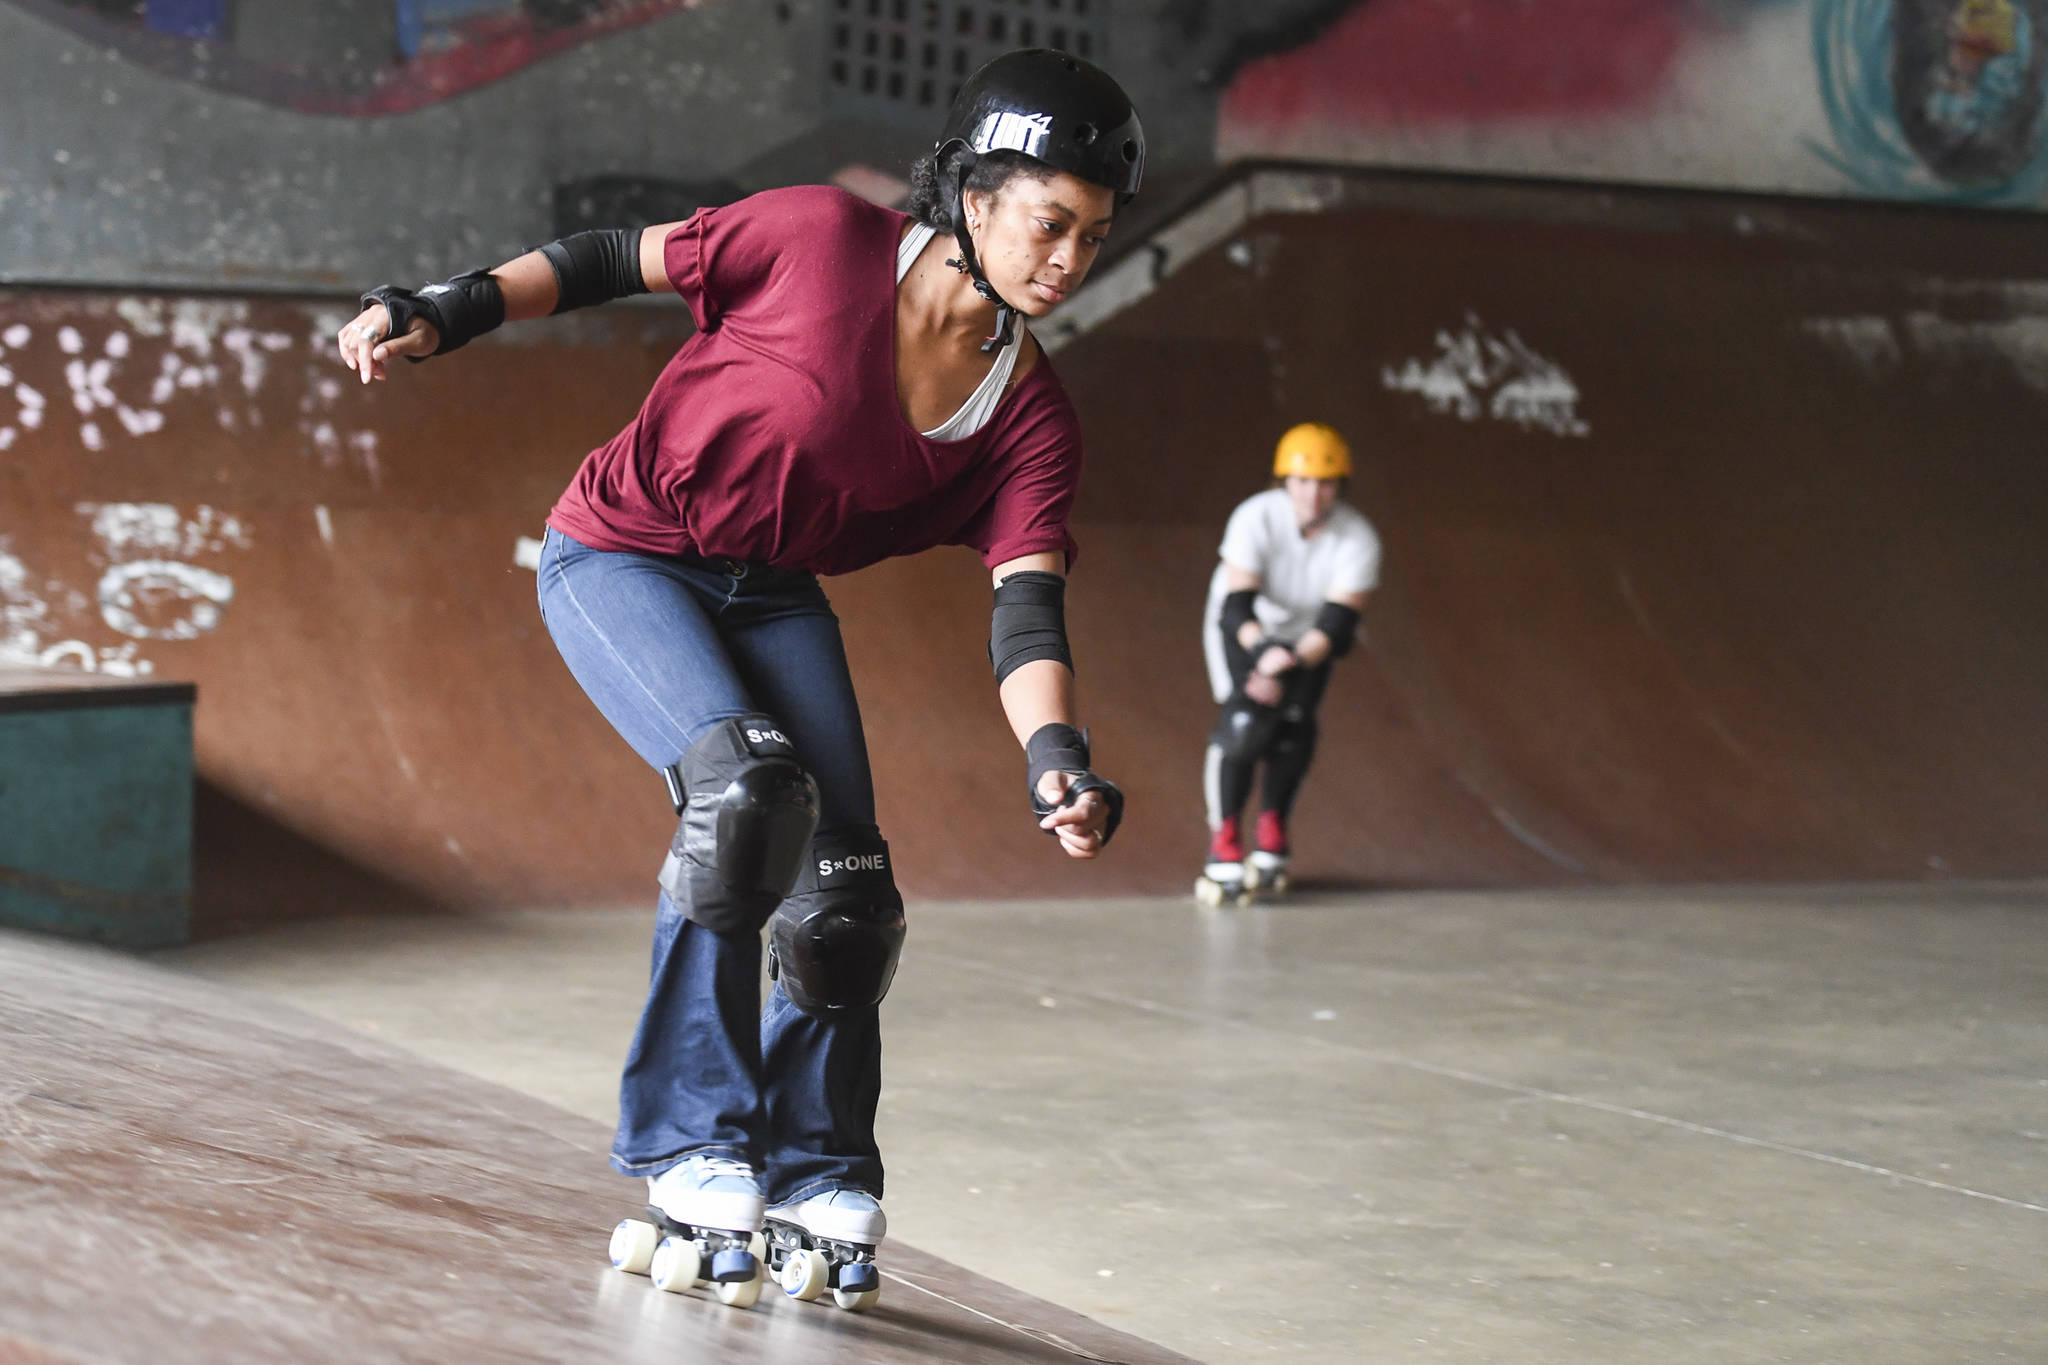 Jennifer Gross, left, and Shabadrang Khalsa, who skate with the Juneau Rollergirls, get their daily skate in at the Pipeline Skate Park on Friday, Oct. 11, 2019. The two are skating everyday as part of a challenge to everyday for a year. (Michael Penn | Juneau Empire)